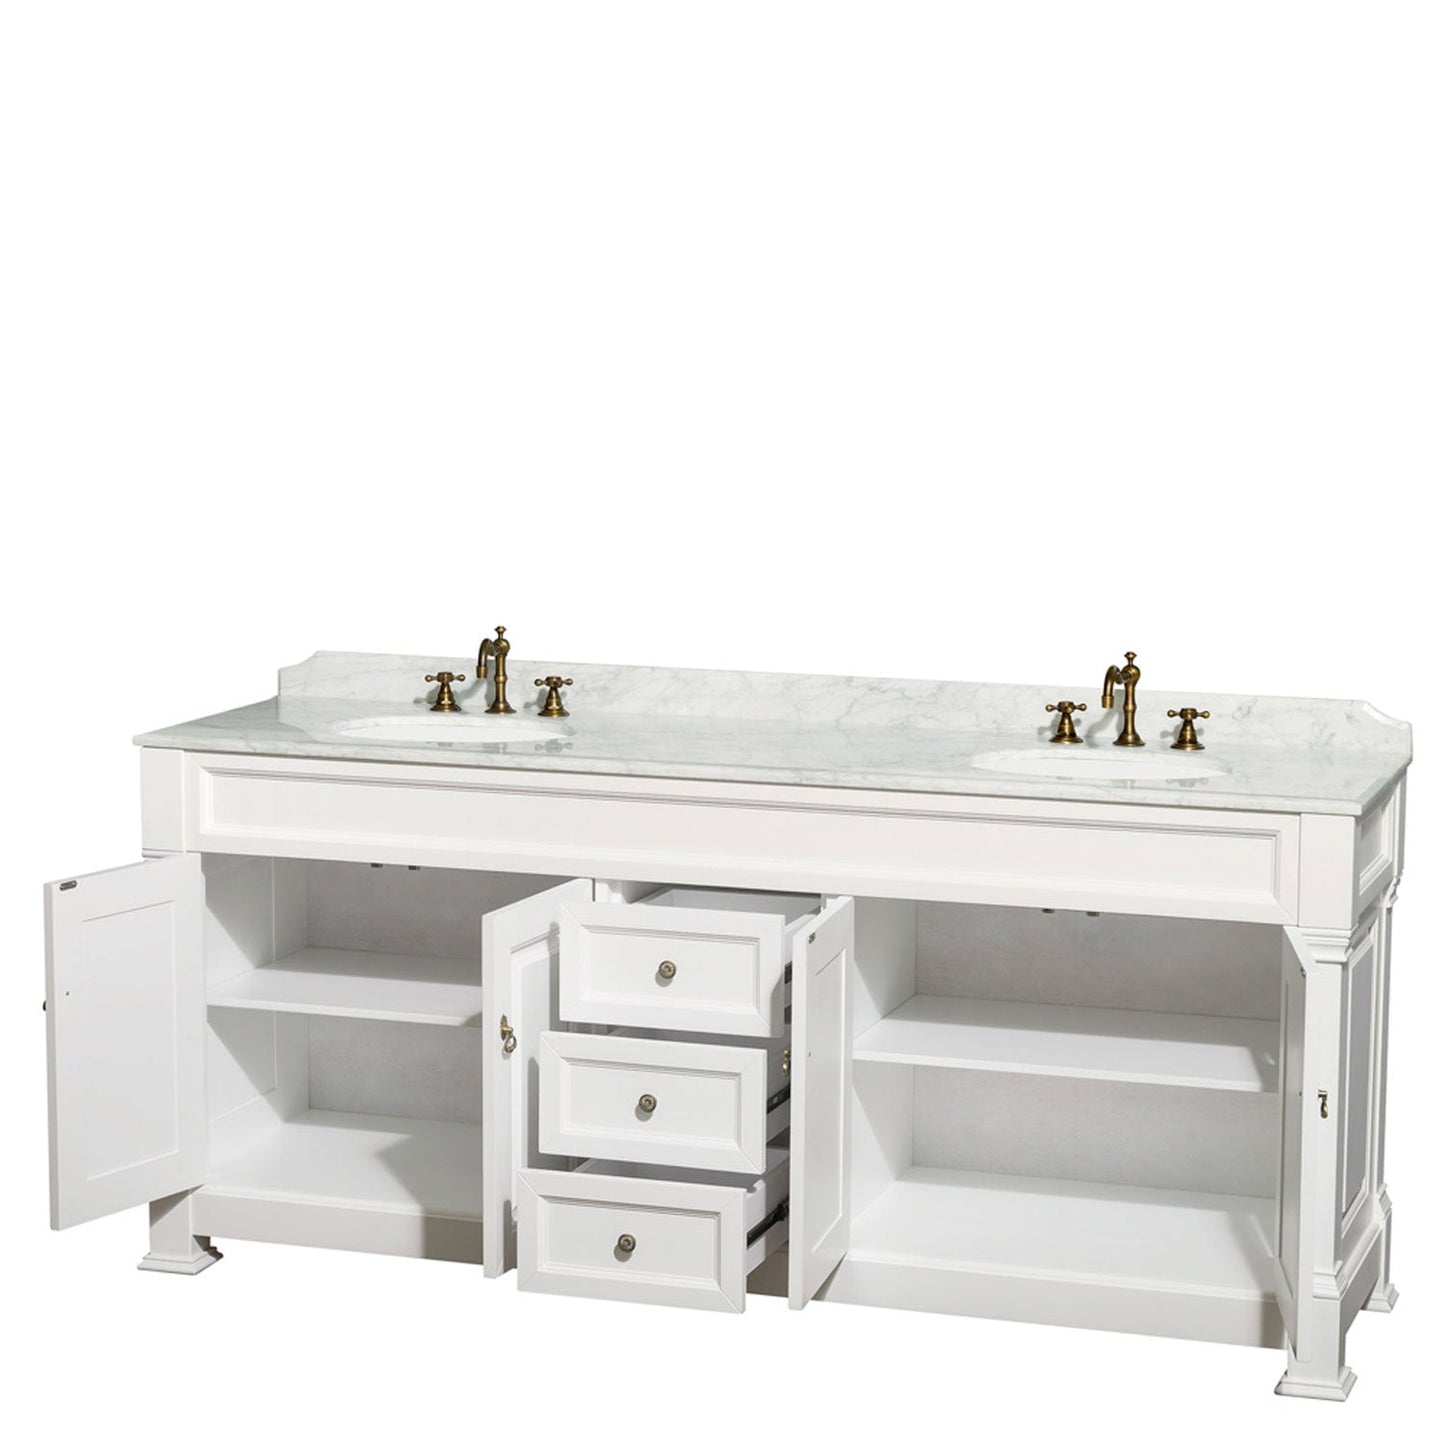 Wyndham Collection Andover 80" Double Bathroom Vanity in White With White Carrara Marble Countertop & Undermount Oval Sink